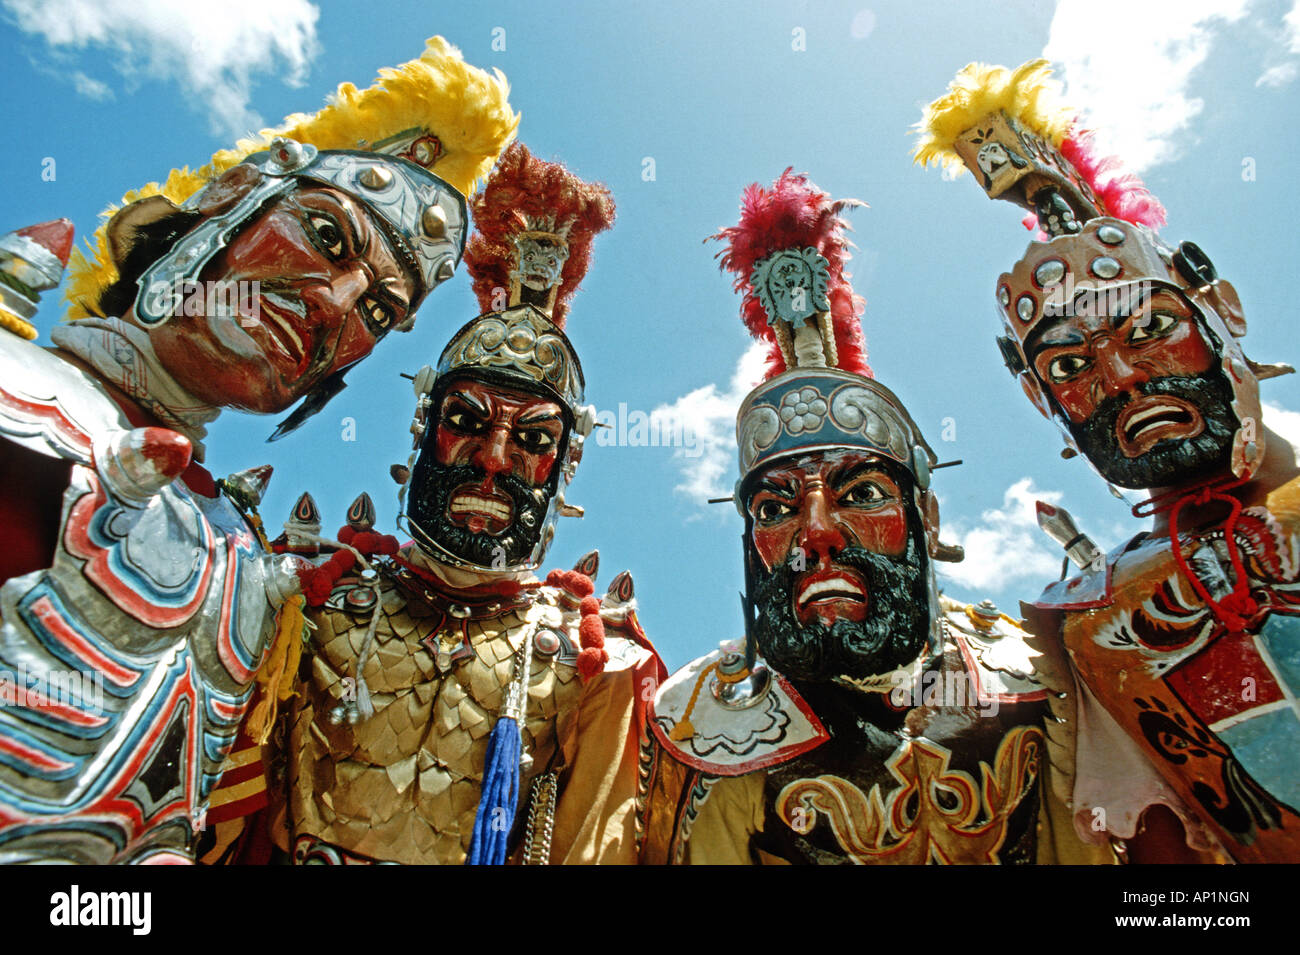 Moriones Festival, annually during the observance of Holy Week